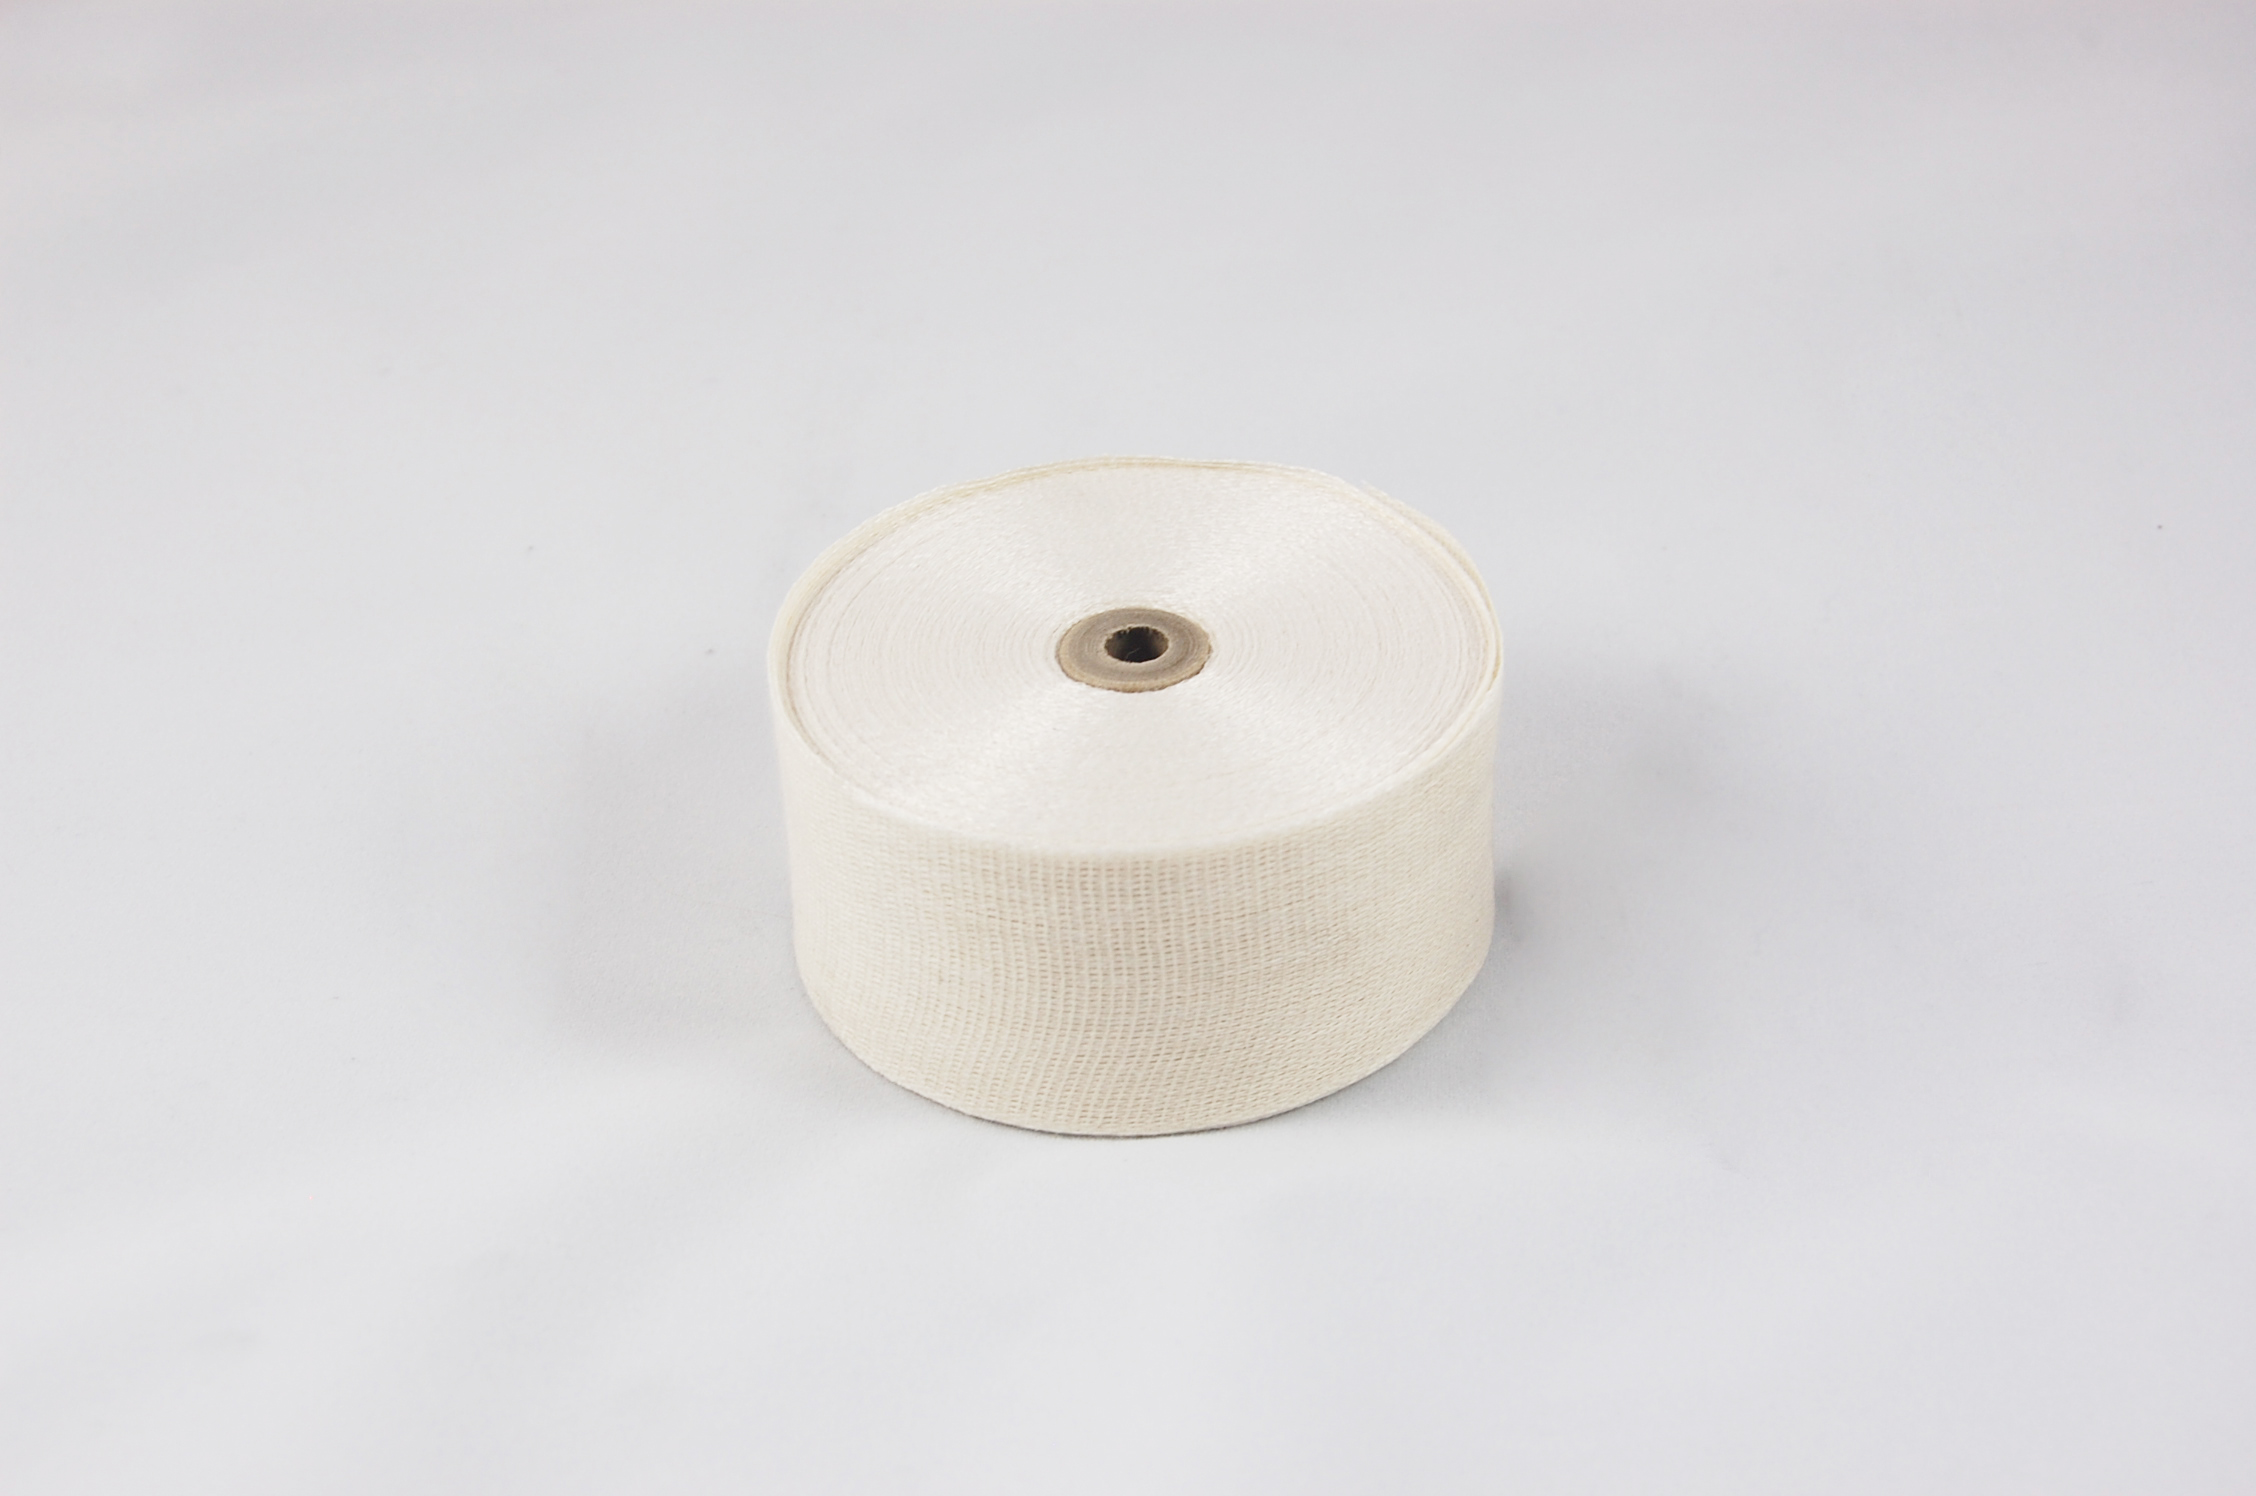 1" 6428-17 .007" Woven Cotton Tape (Lightweight) 105°C, natural, 1" wide x  36 YD roll